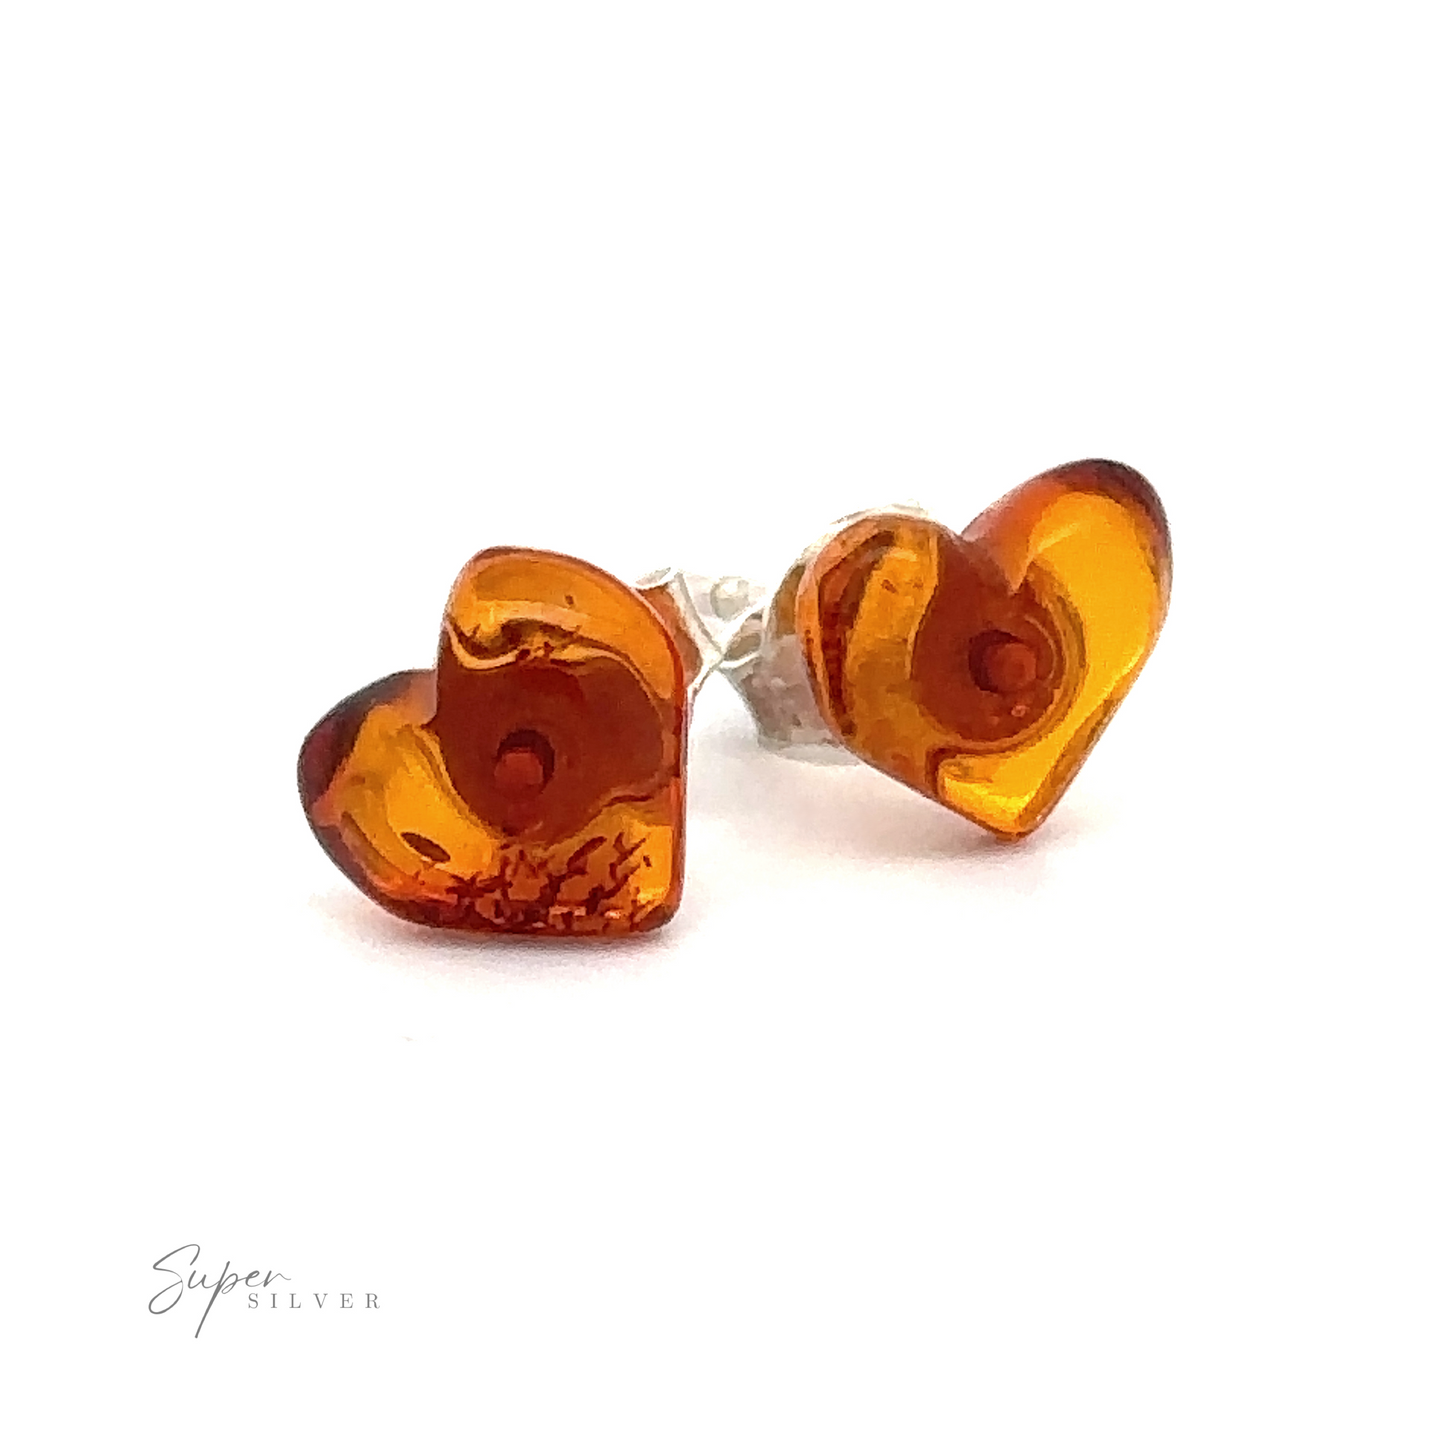 Two heart-shaped Amber Heart Studs with a polished, translucent finish are displayed on a white background. The earrings are positioned at an angle, showing their depth and texture. "Super Silver" is written in the bottom-left corner.